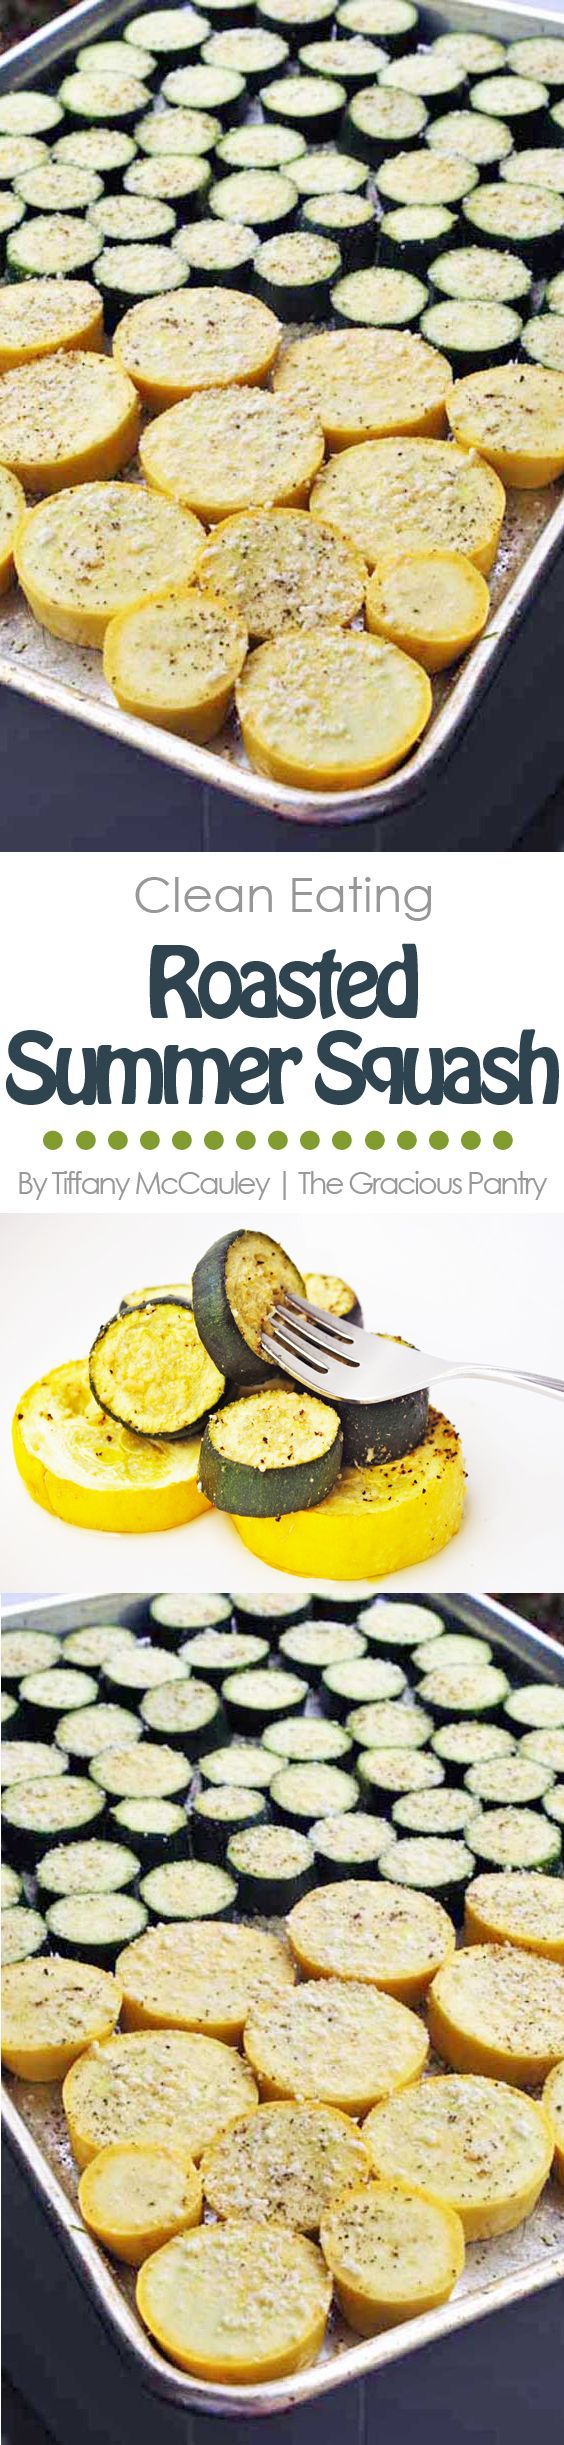 This Clean Eating Roasted Summer Squash Recipe is a delicious way to get more veggies in your day! (An